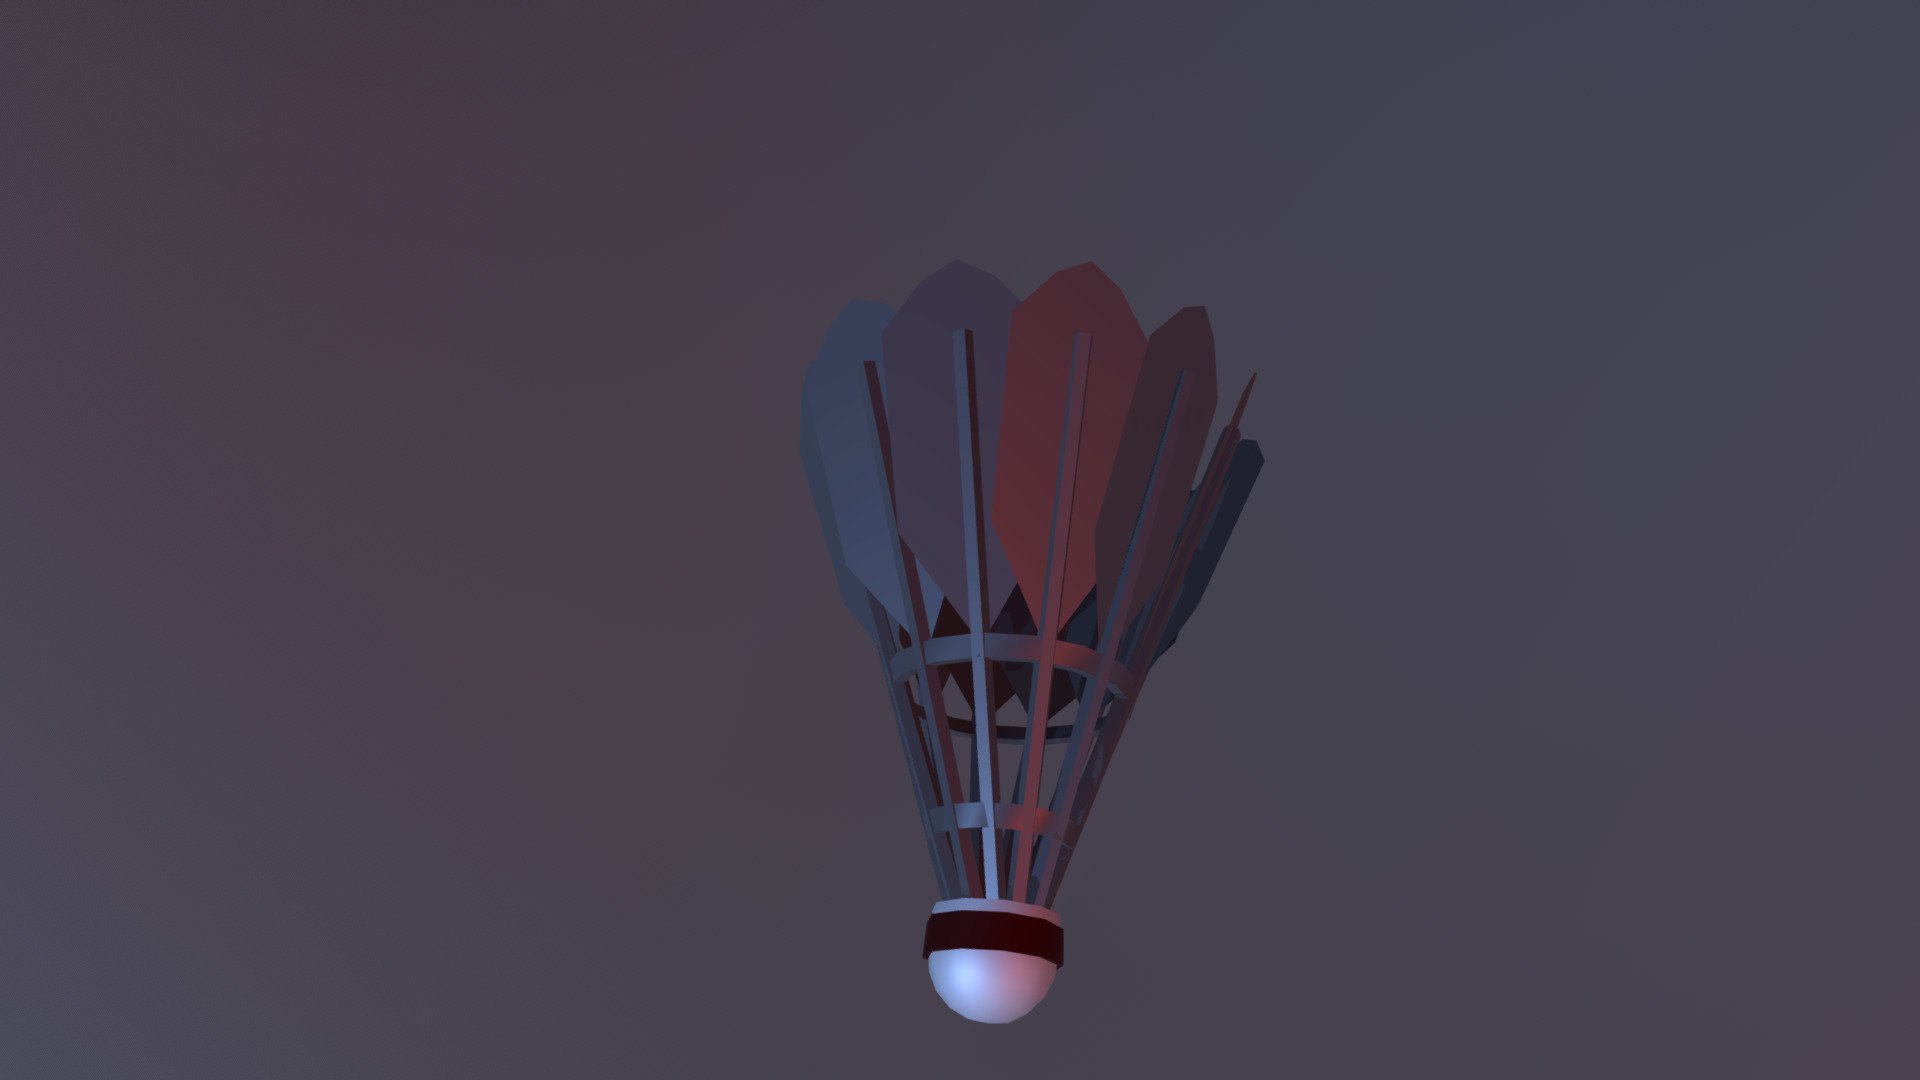 my first time send model,just a test - Badminton - 3D model by bo.huang 3d model